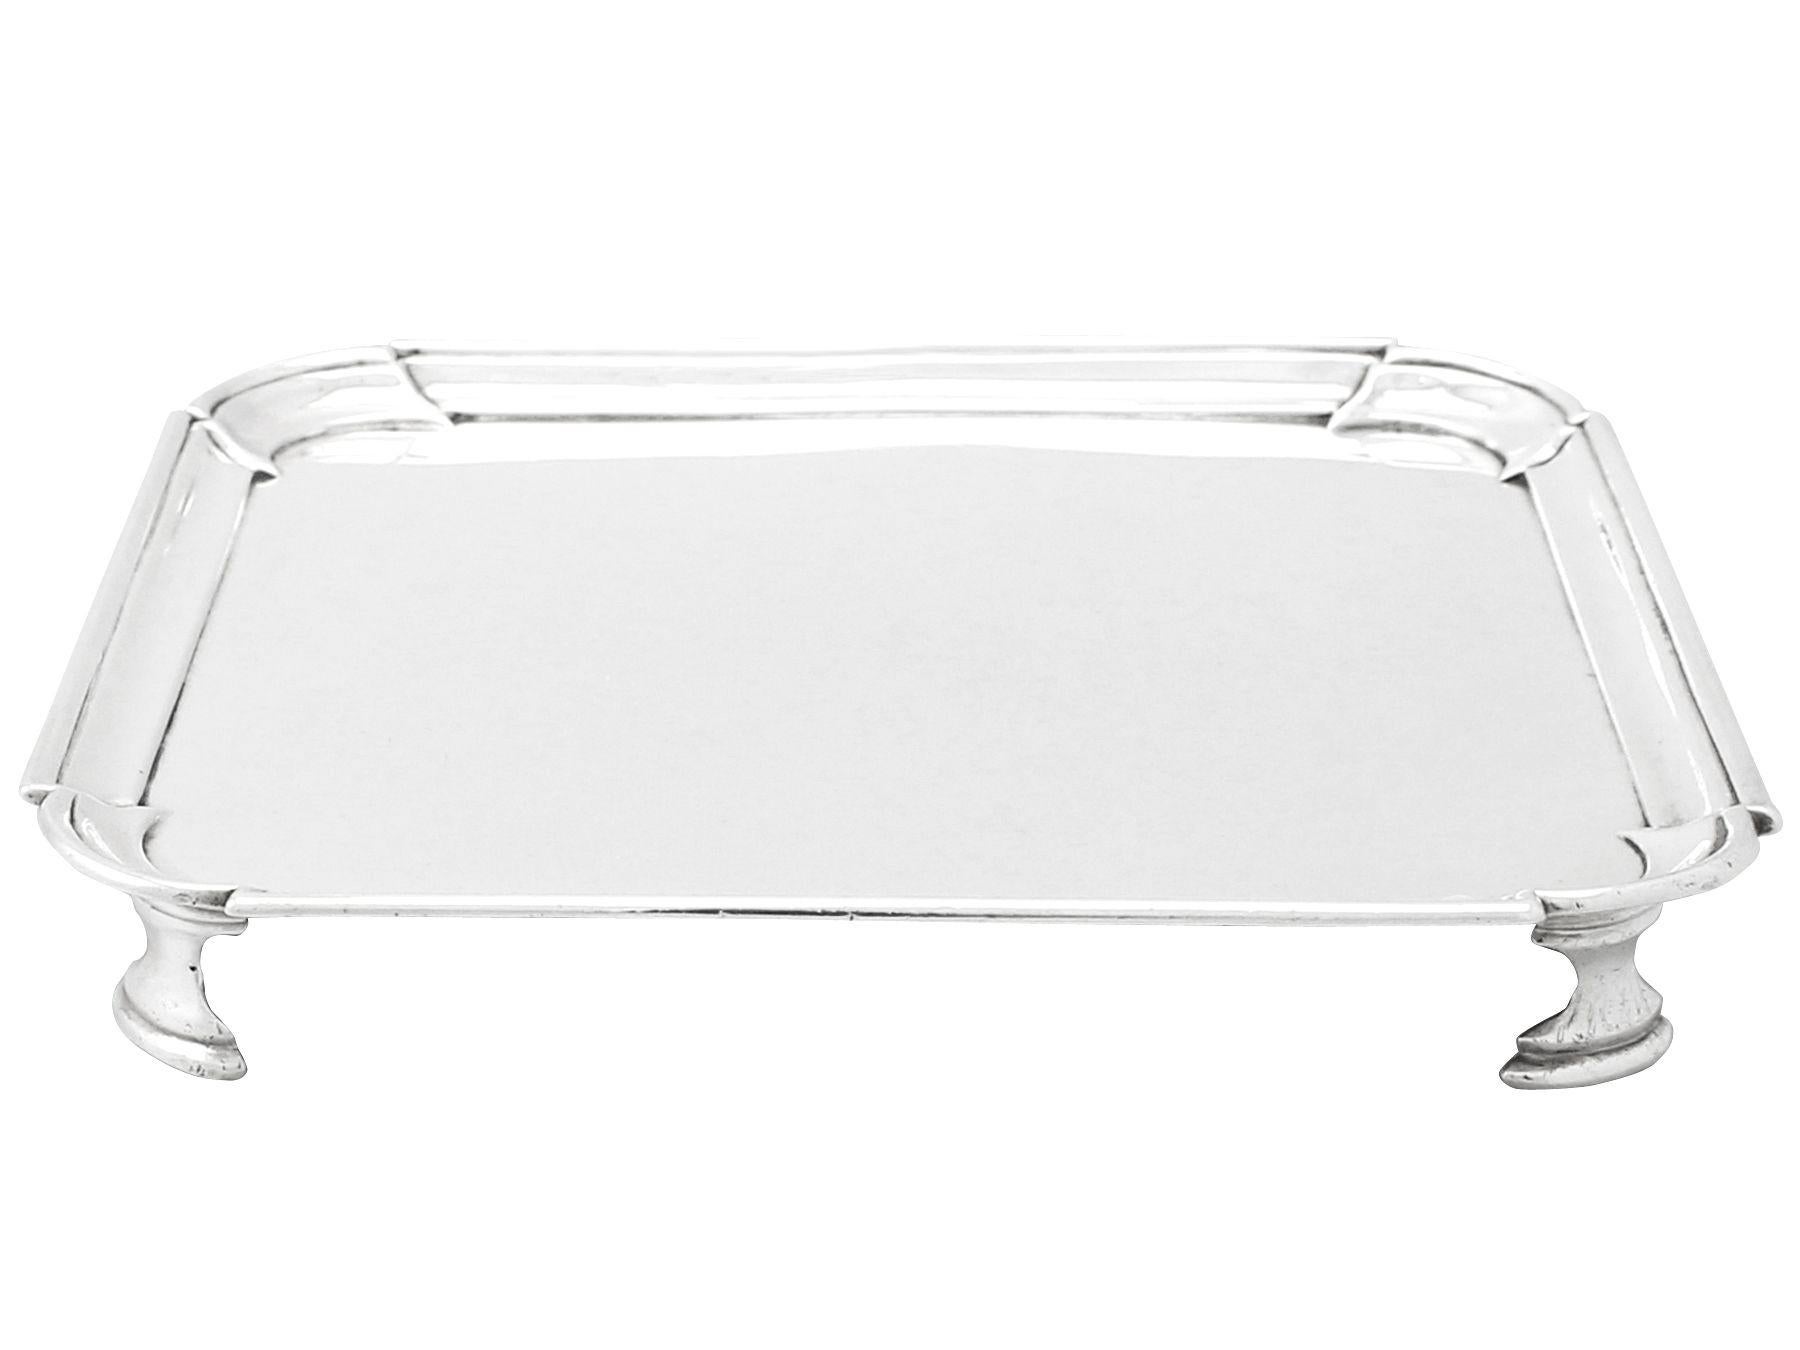 An exceptional, fine and impressive antique Georgian English sterling silver salver; an addition to our dining silverware collection.

This exceptional antique George II sterling silver salver has a plain square shaped form with rounded incurved